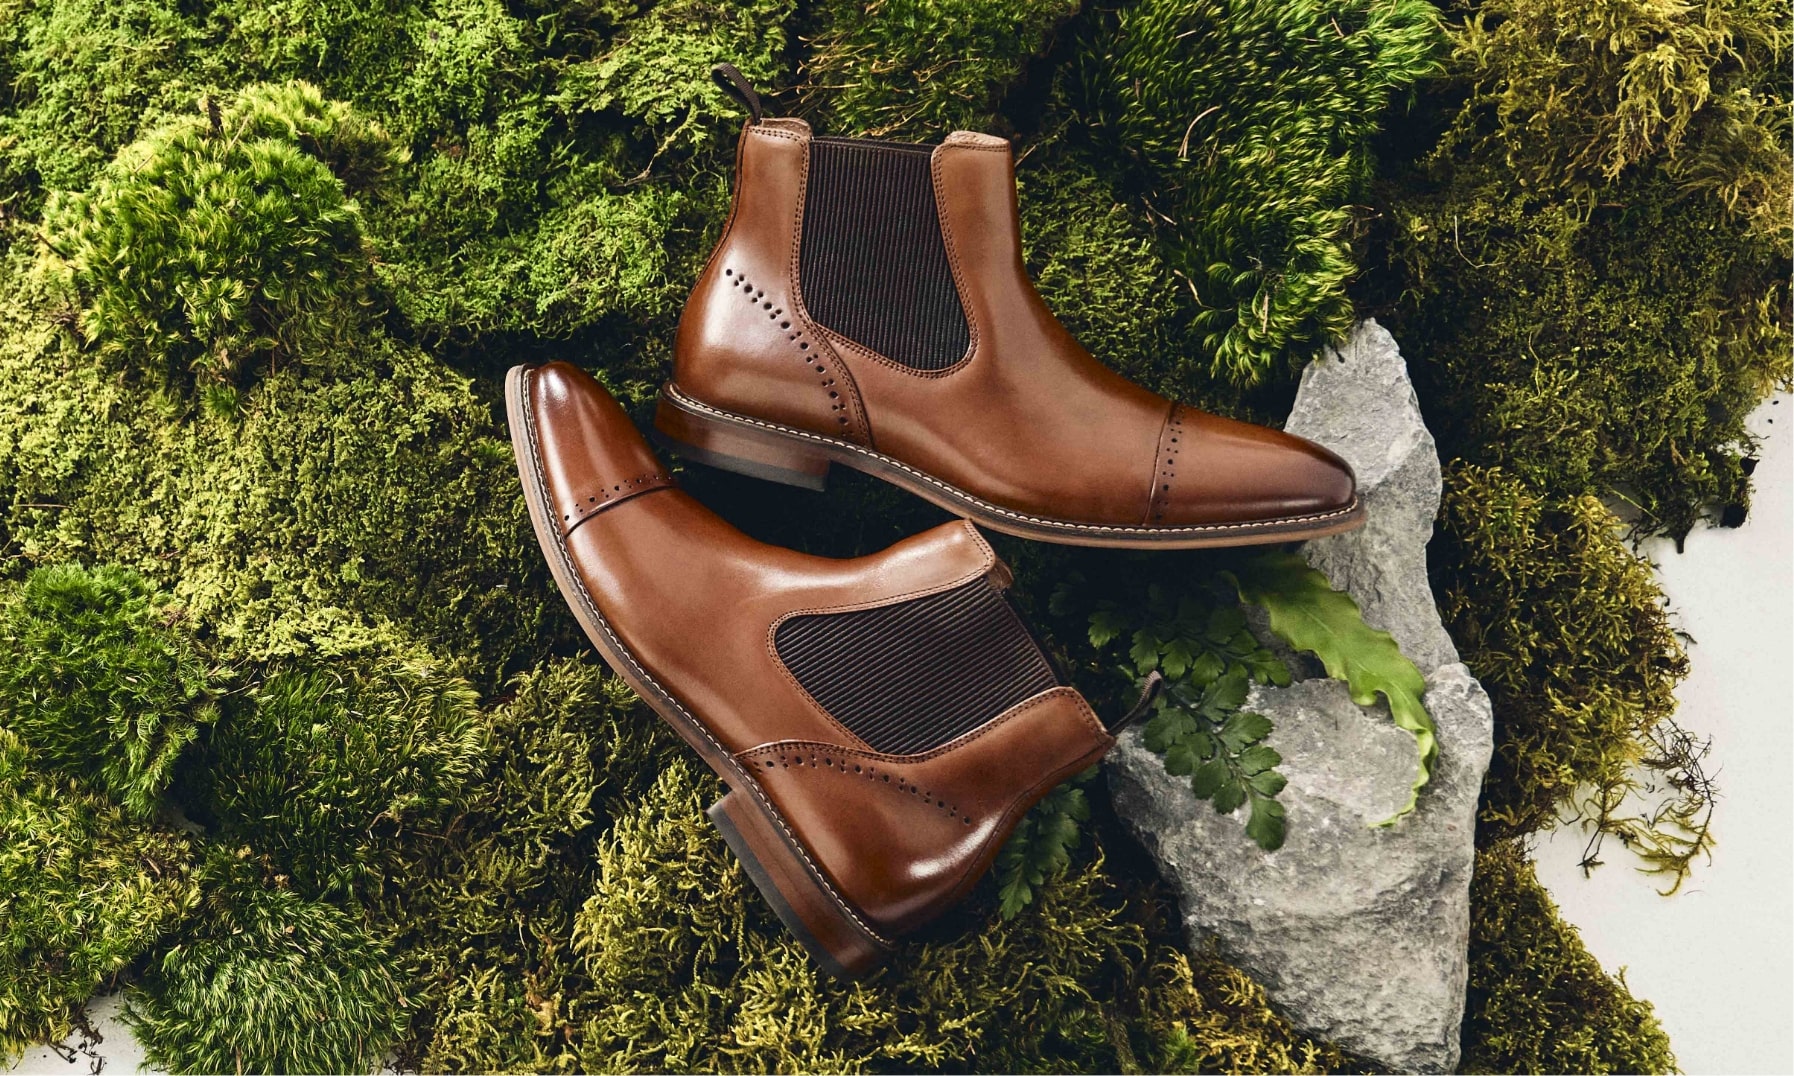 Click to shop Stacy Adams dress shoes. Image features the Maury boot in cognac.